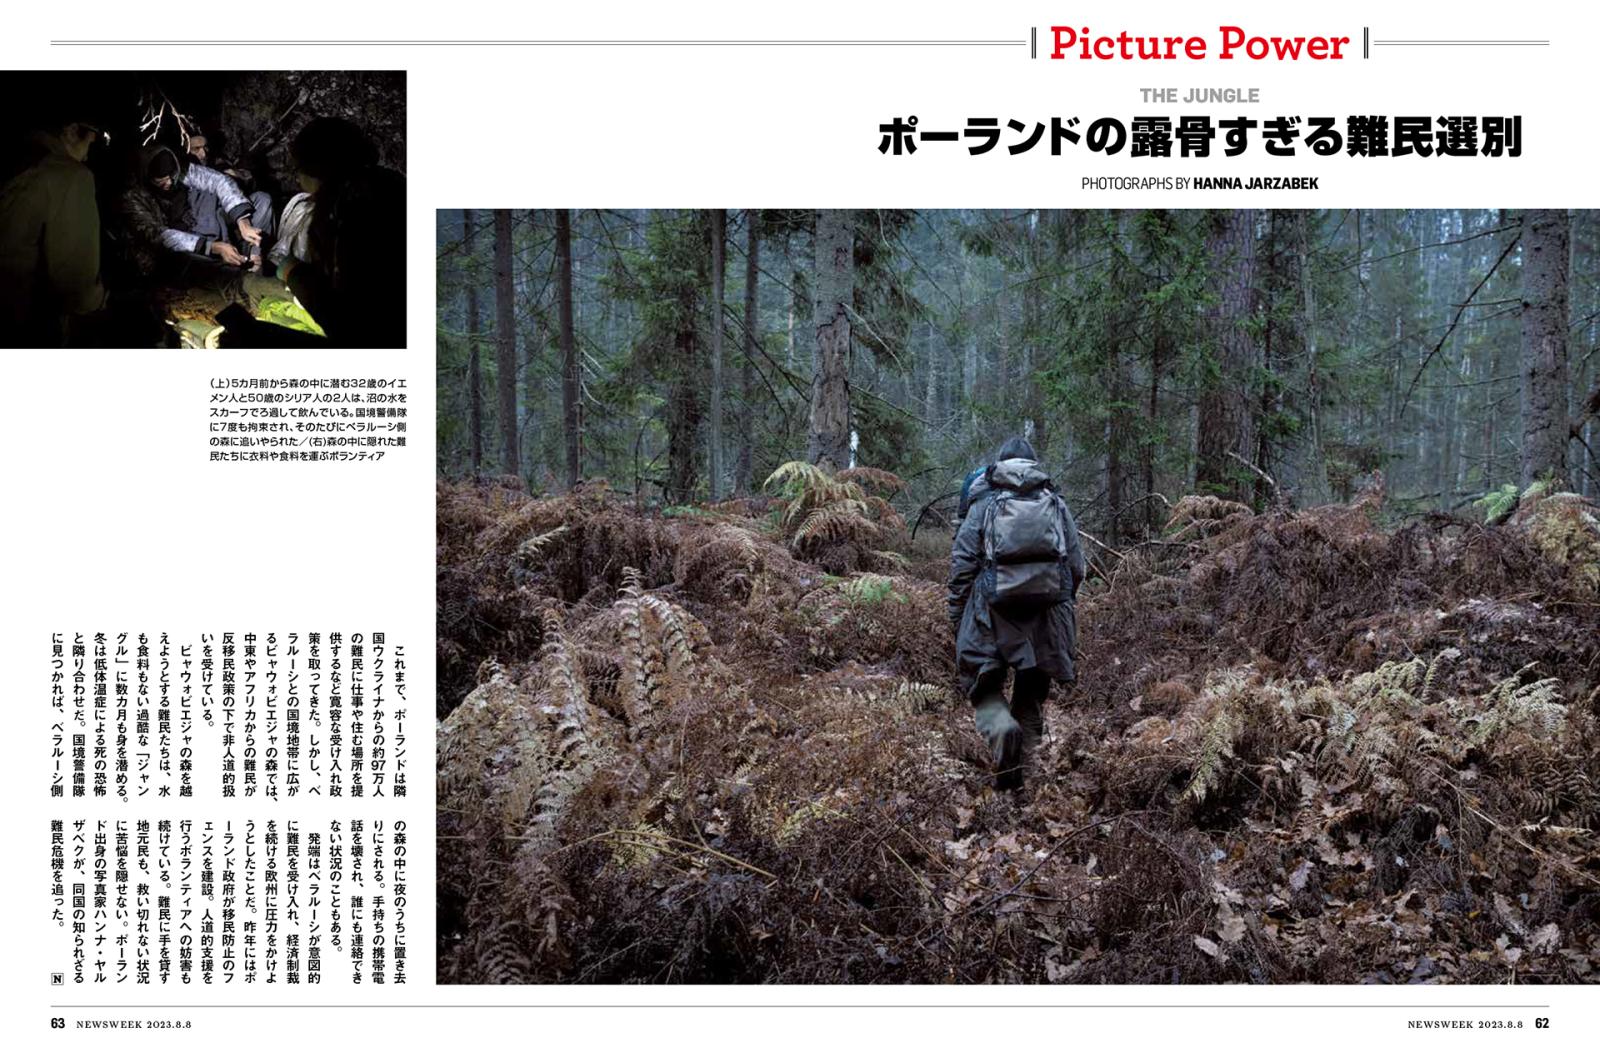 Thumbnail of Newsweek Japan publishes part of "The Jungle" project